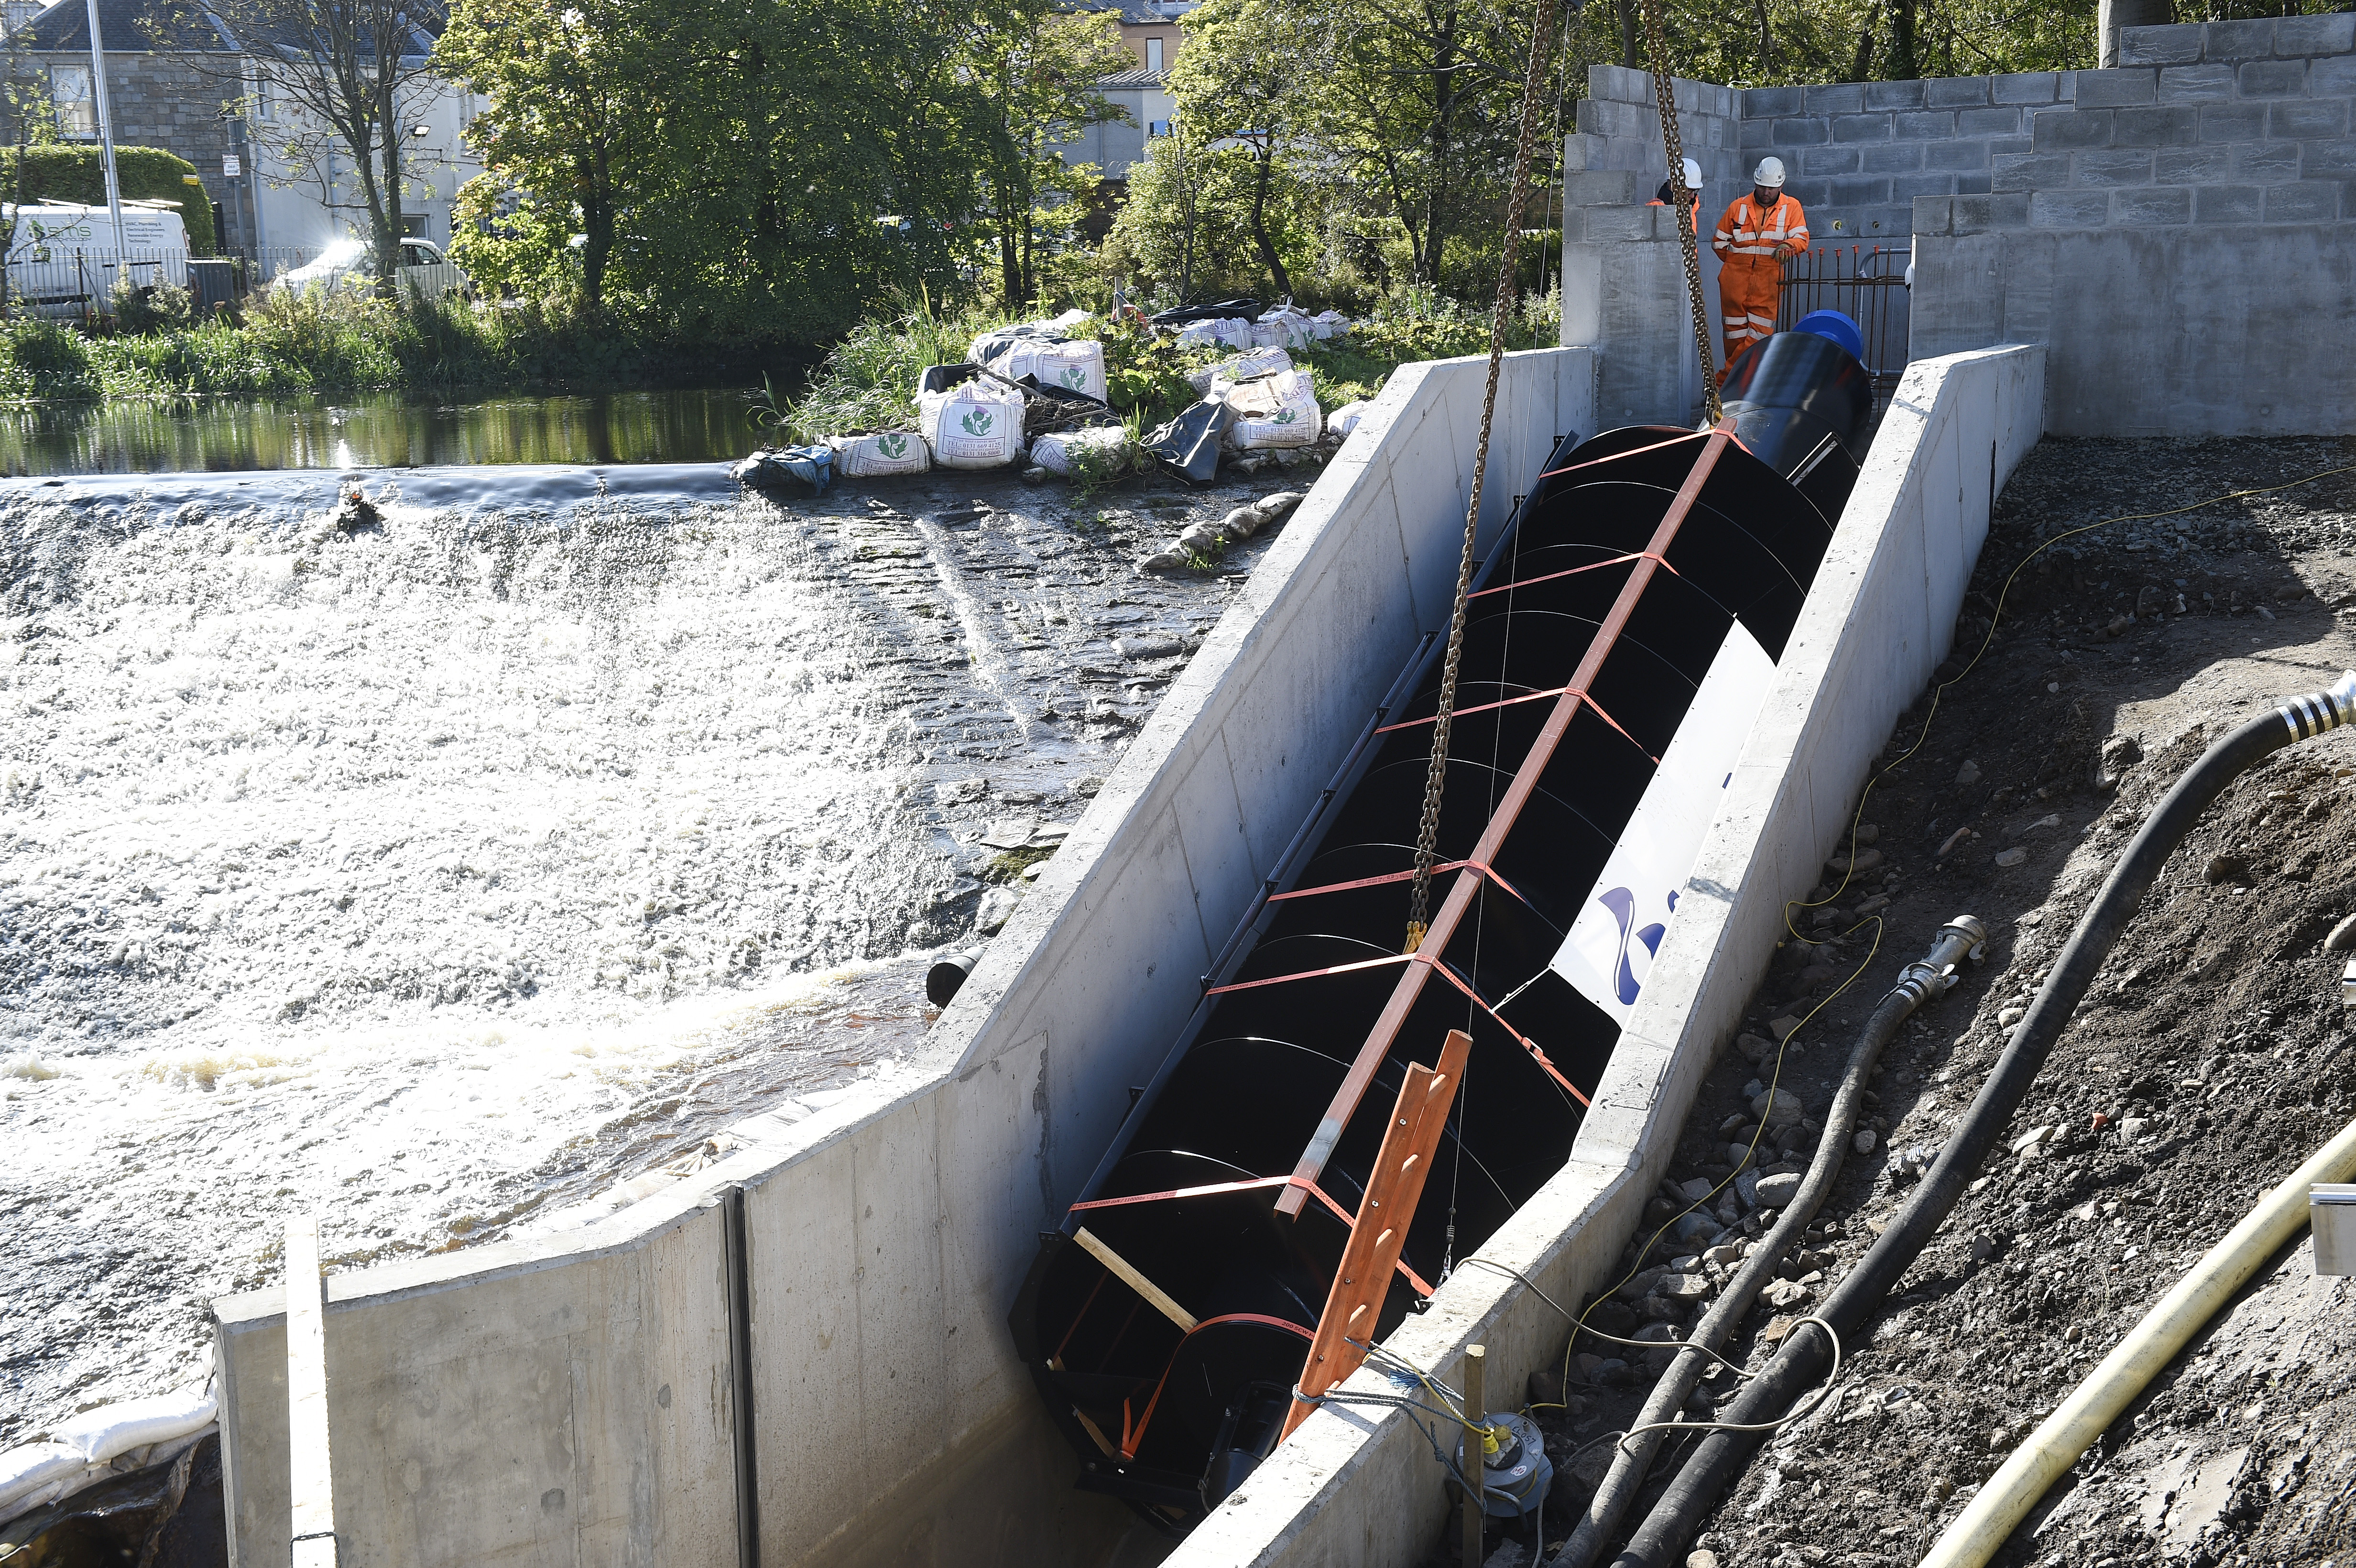 In Pictures: Archimedes screw hoisted into place at Saughton Park micro-hydro  scheme